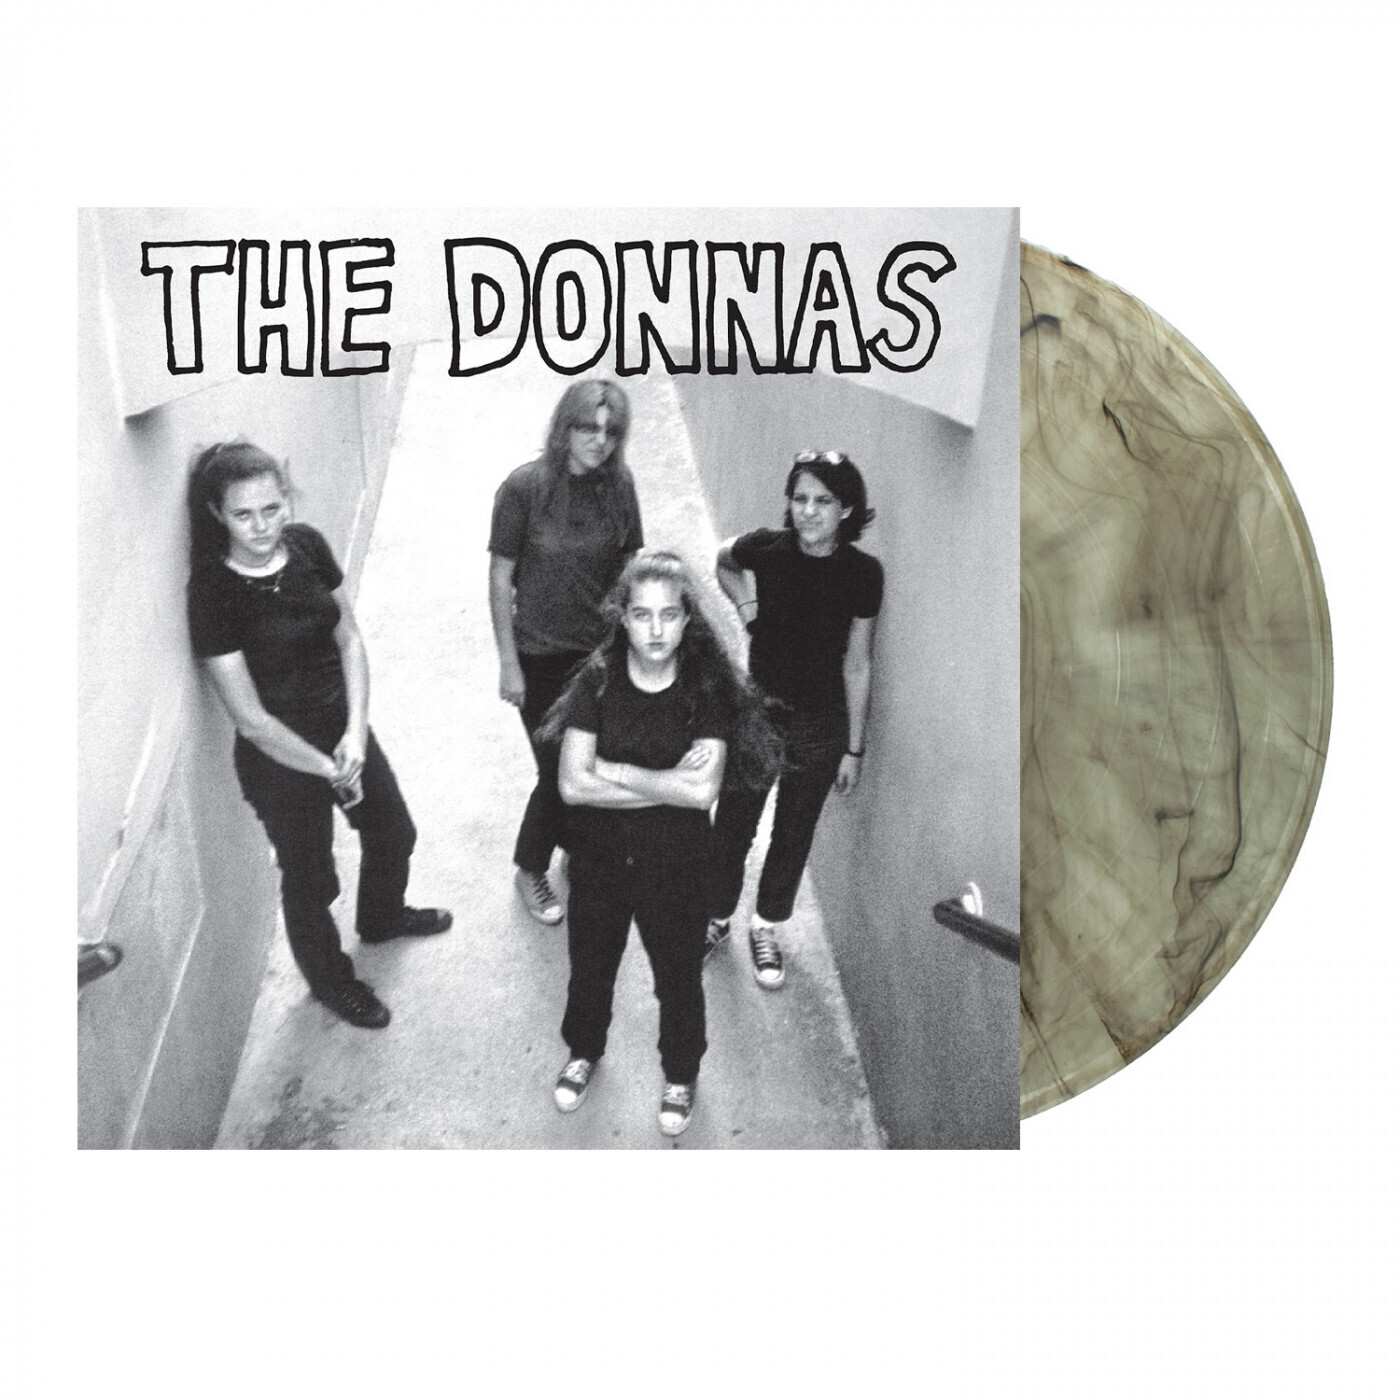 The Donnas "The Donnas" *Natural w/ Black Swirl"